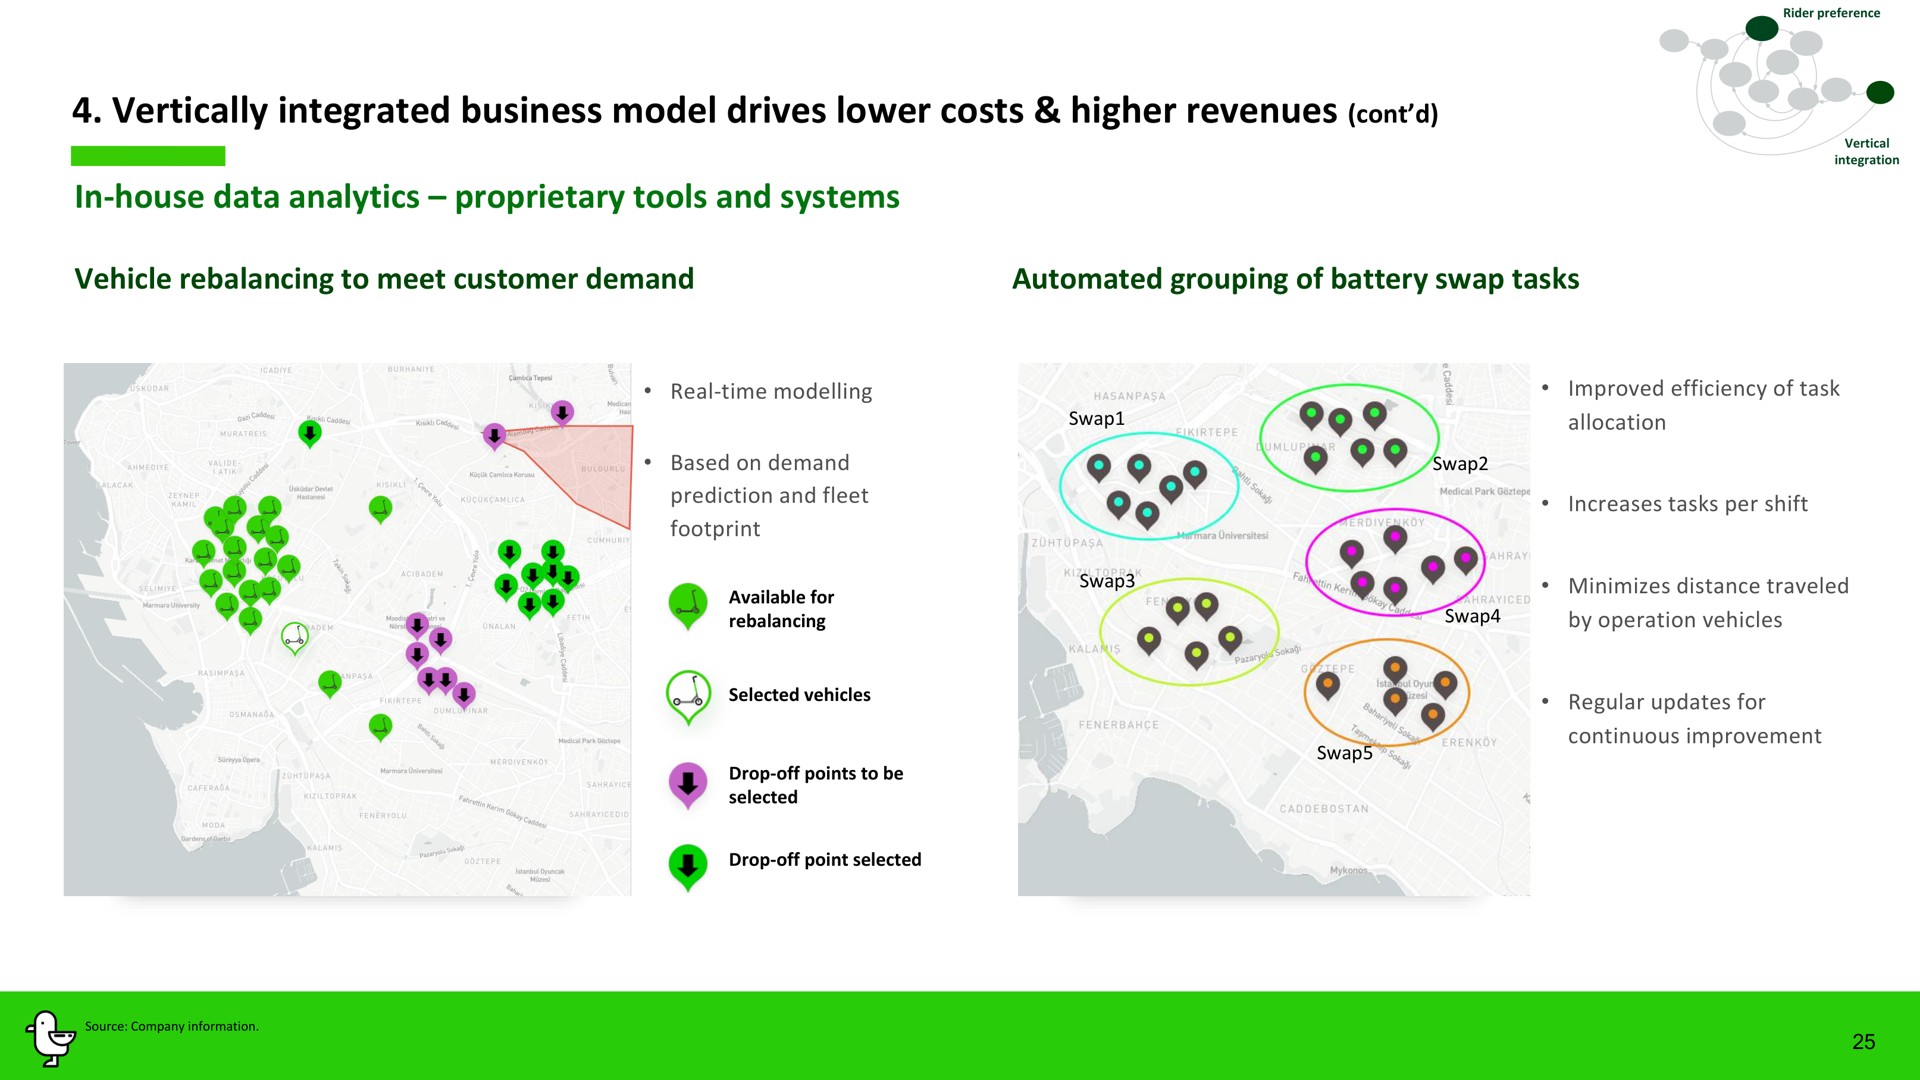 vertically integrated business model drives lower costs higher revenues in house data analytics proprietary tools and systems | Marti